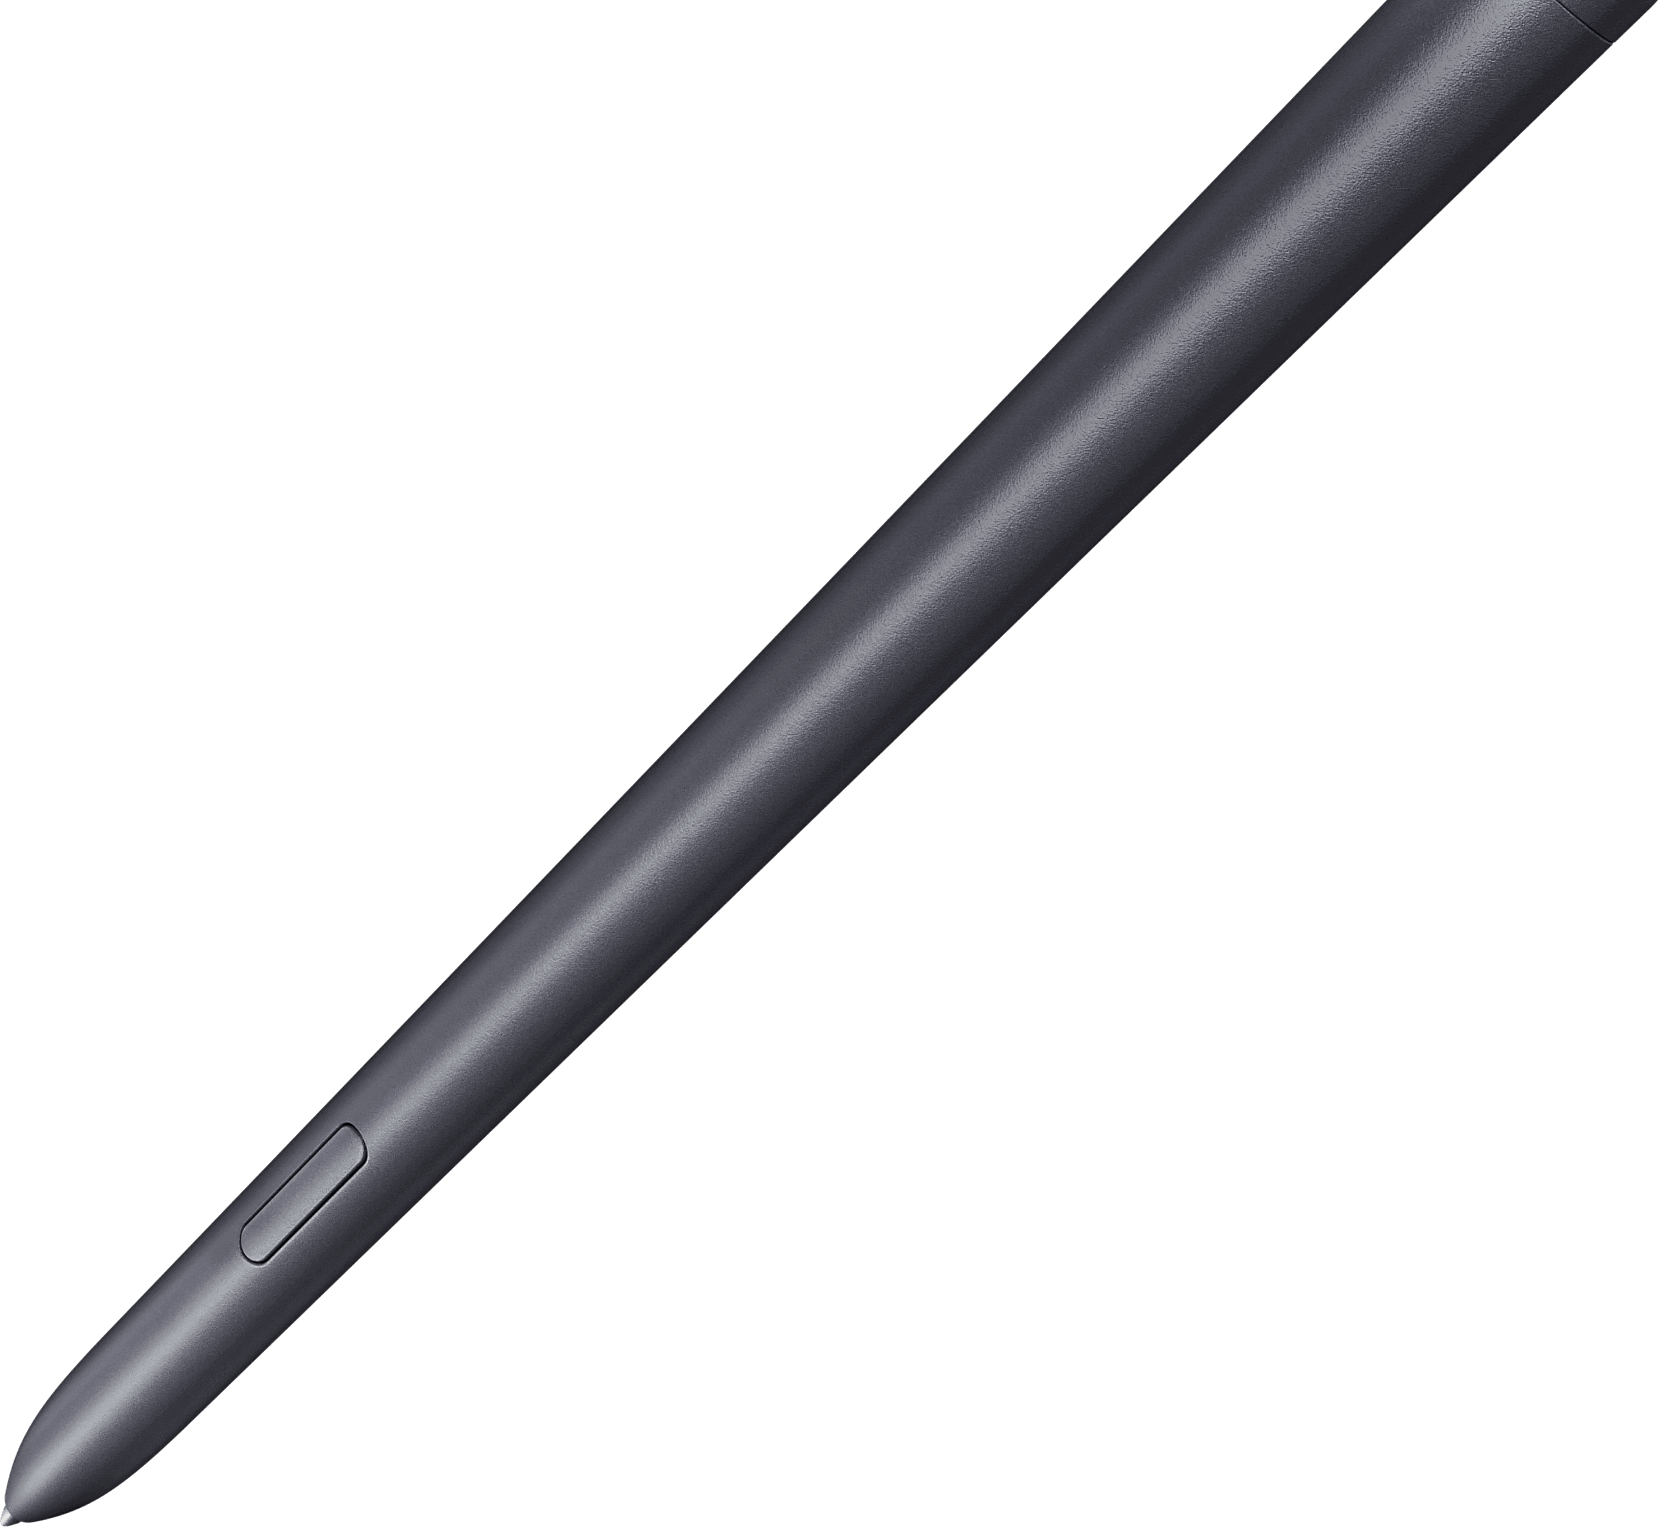 Close-up of S Pen from the side